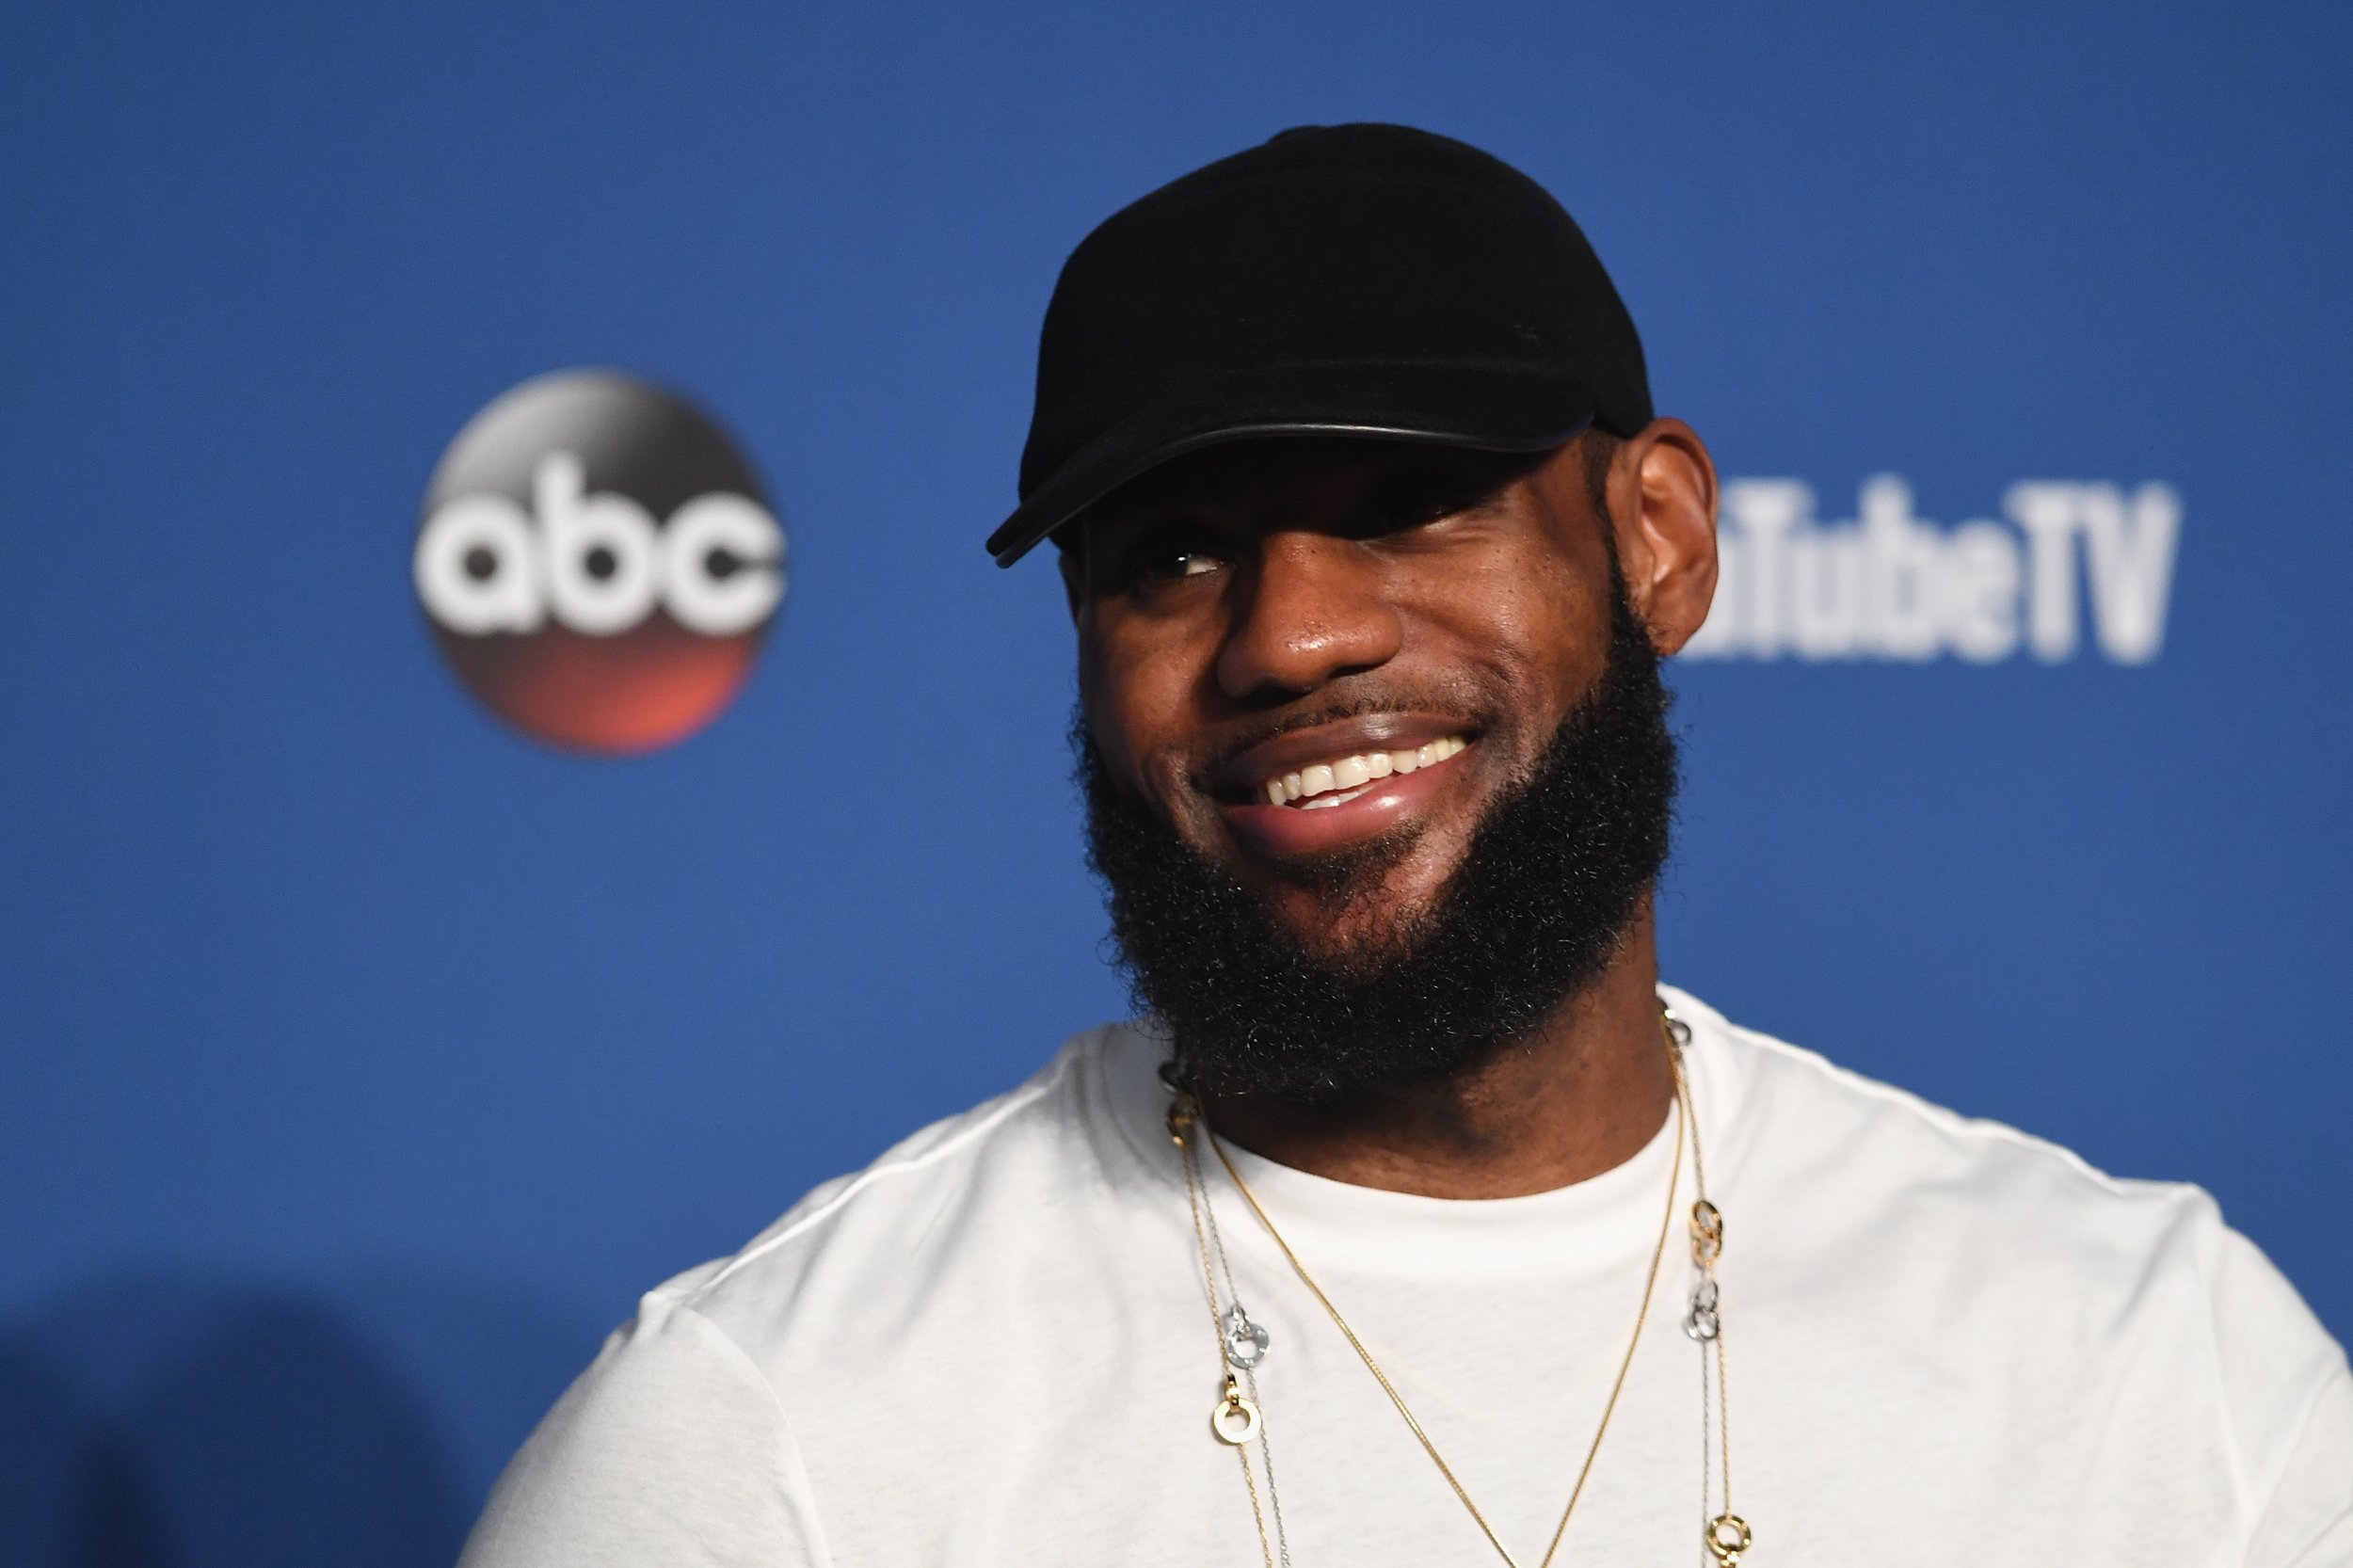 What Is LeBron James' Salary History Before Signing With The Lakers